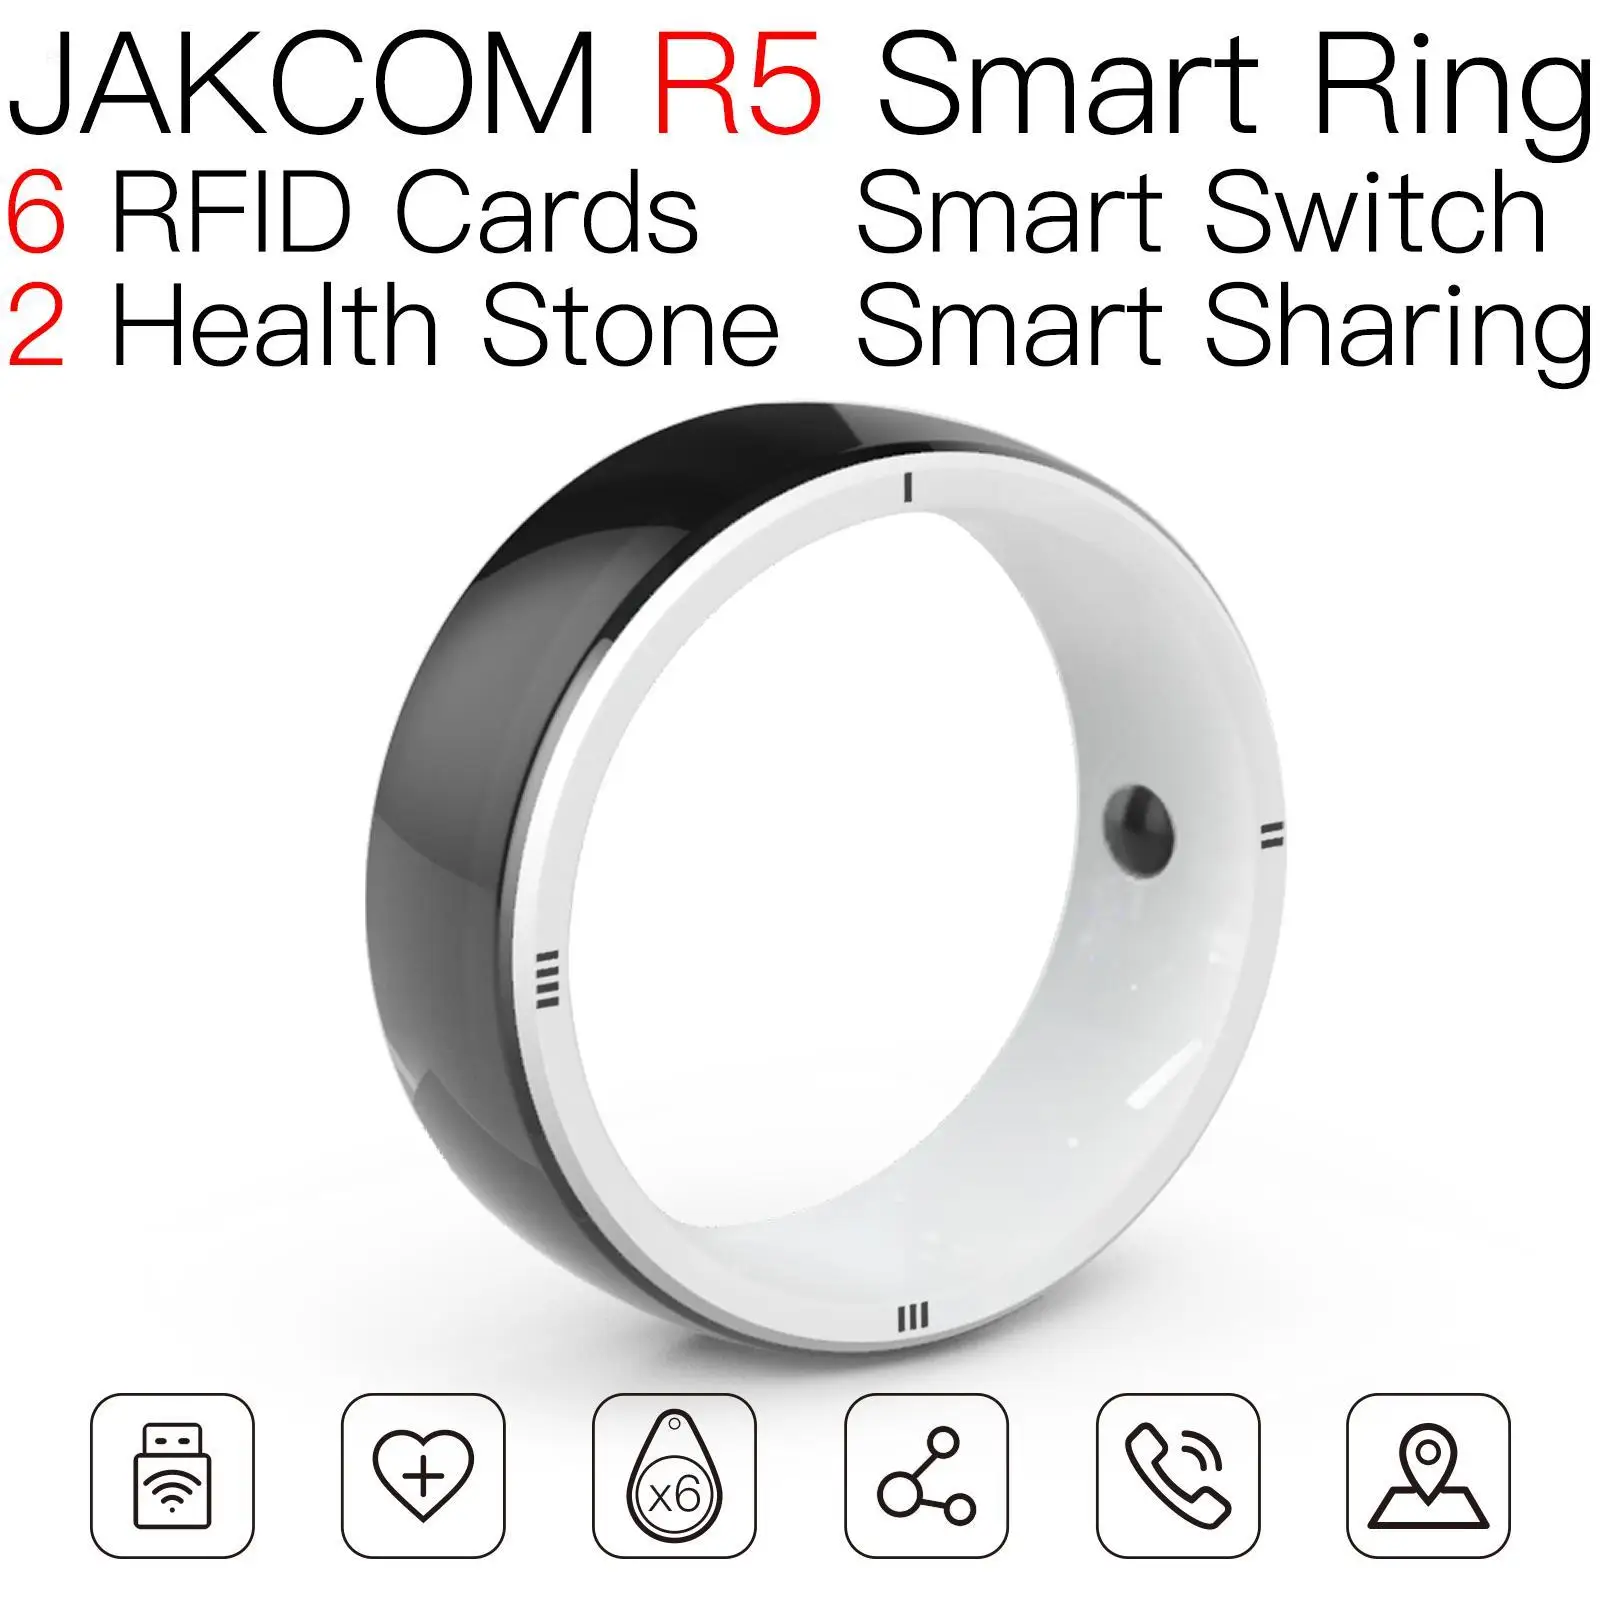 

JAKCOM R5 Smart Ring Super value than rfid label hf chip mascota of camelon nfc id card aomei official store gps tracker for